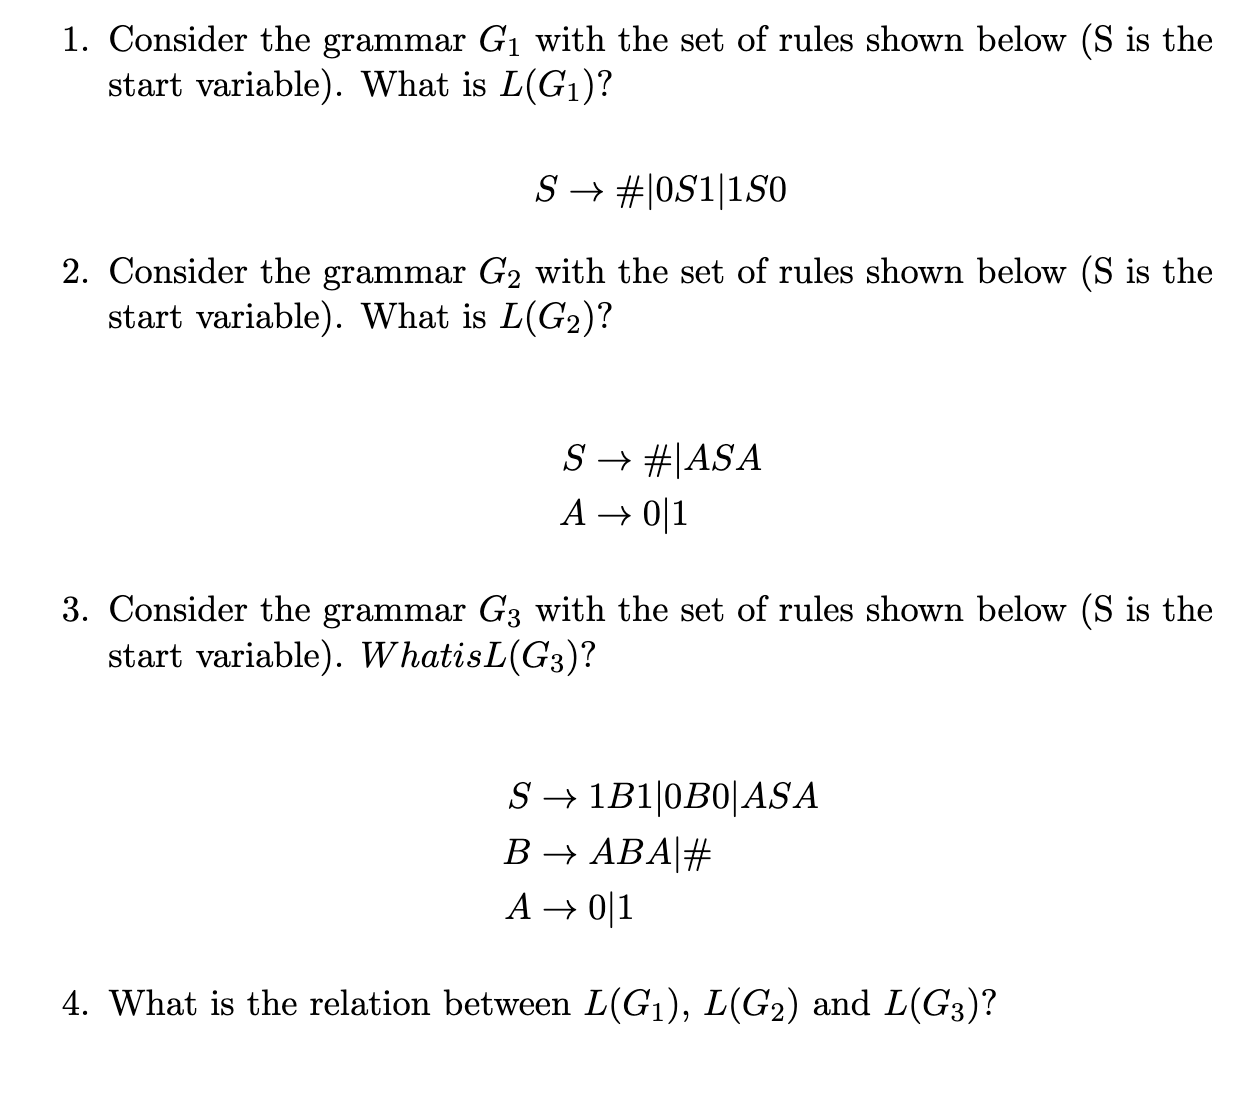 1. Consider the grammar G with the set of rules shown below (S is the start variable). What is L(G)? S